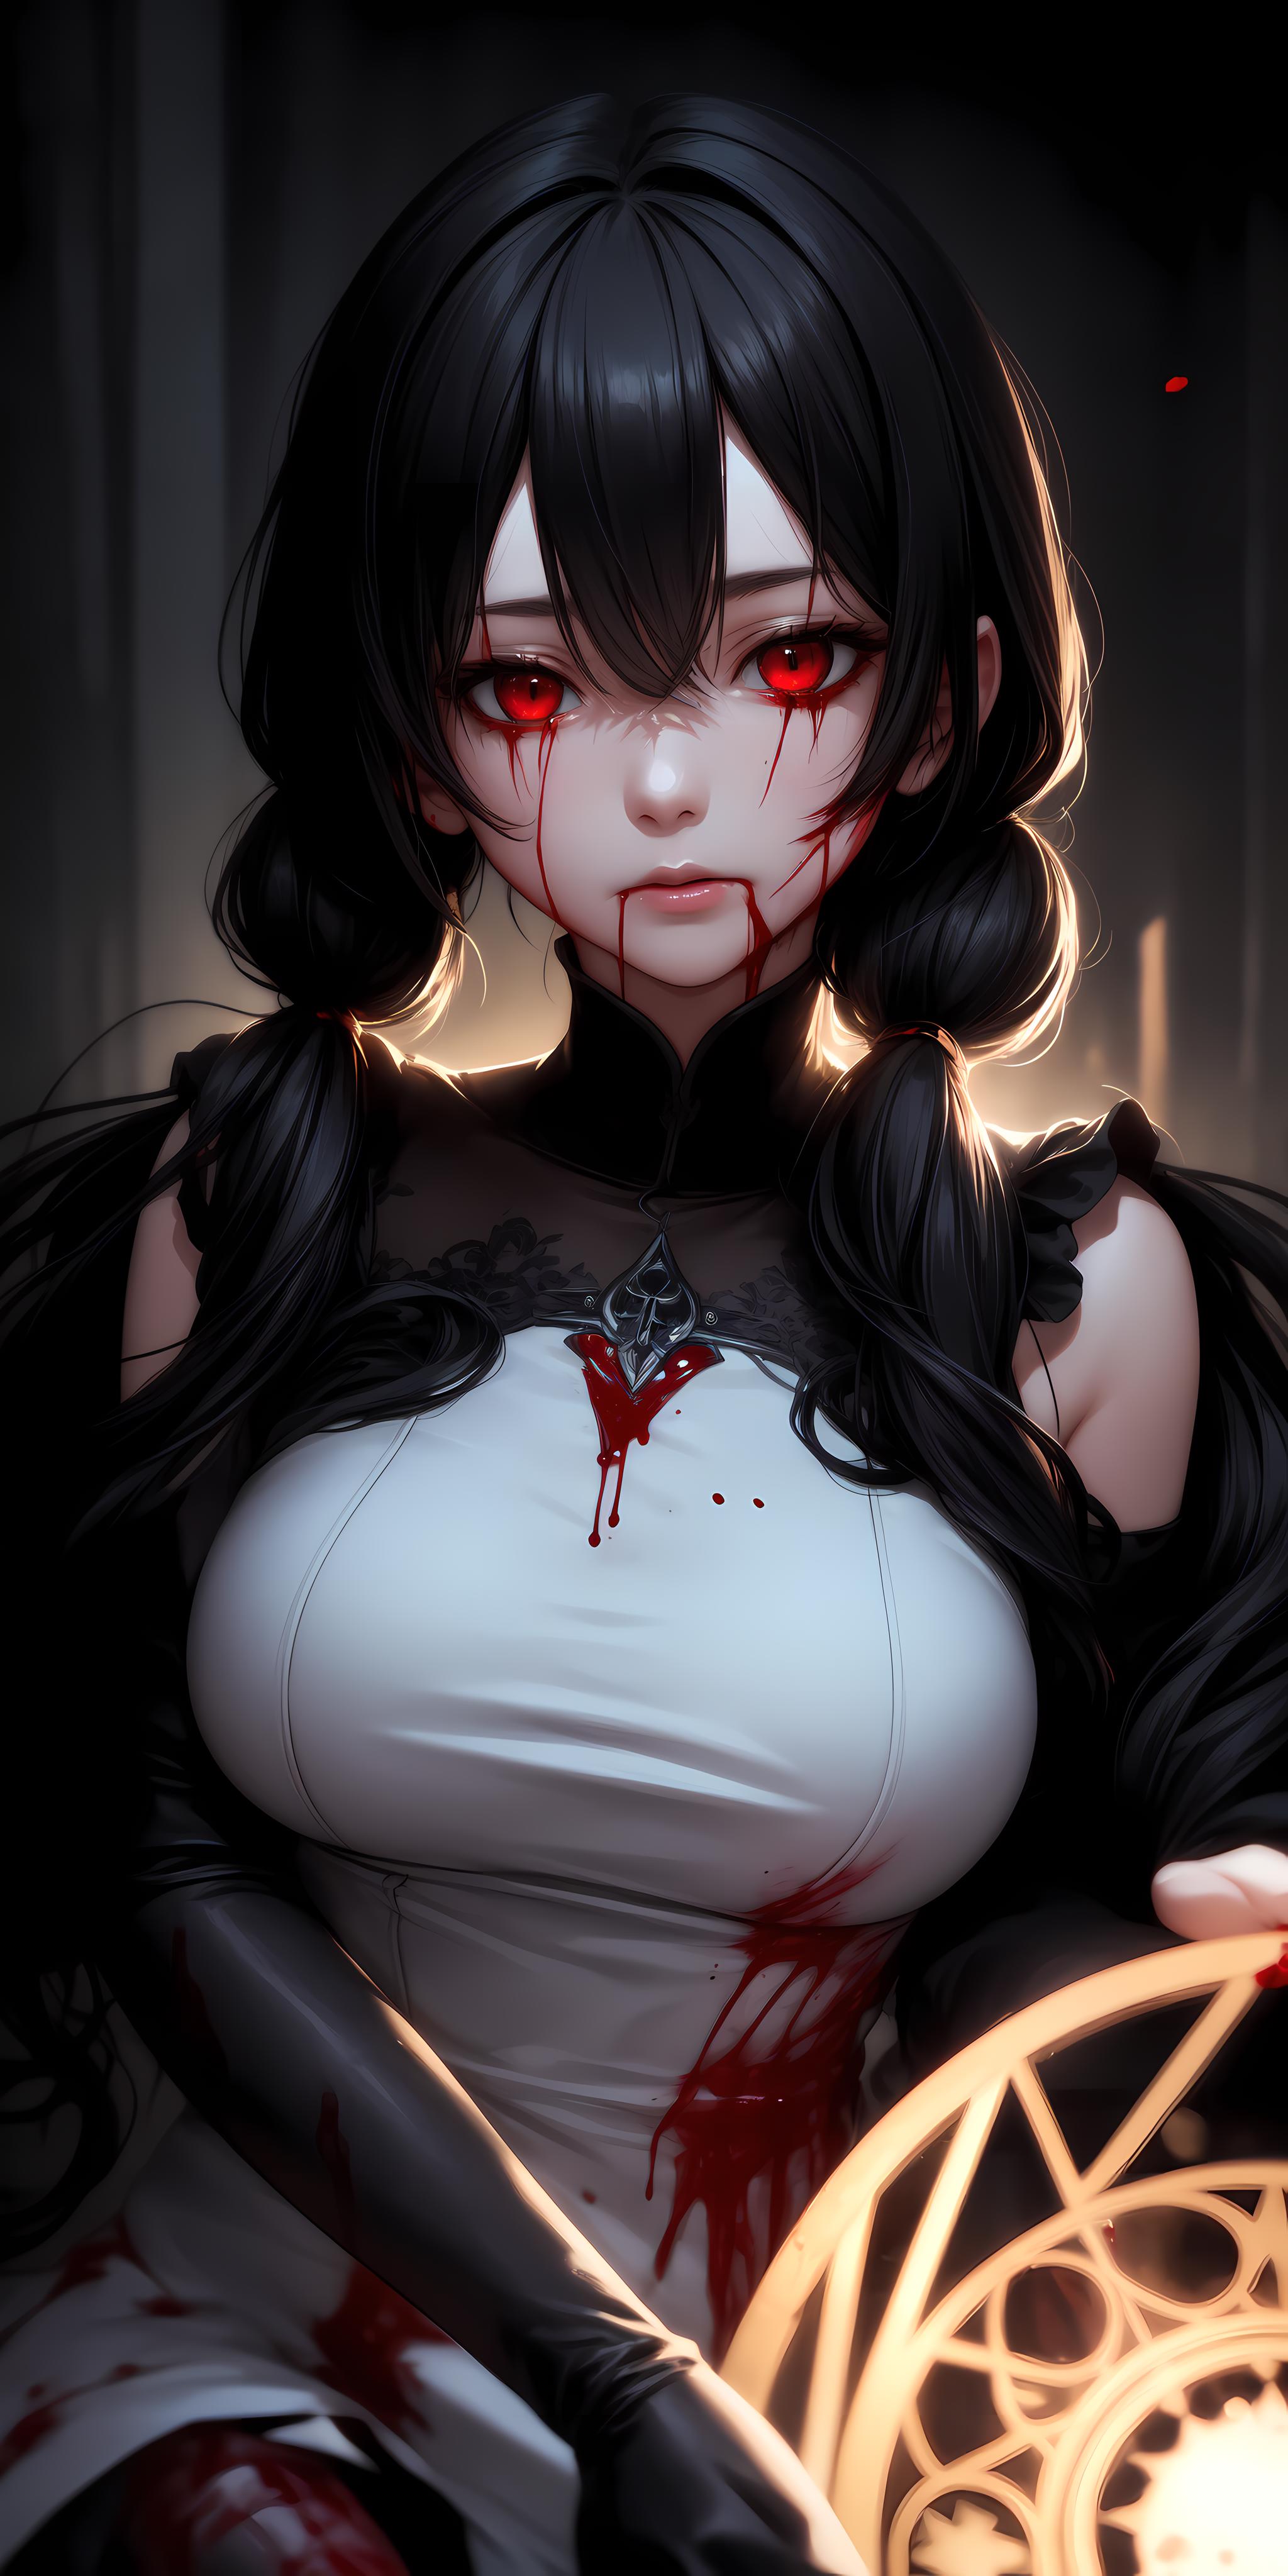 An animated drawing of a woman with black hair, red eyes, and blood on her face.